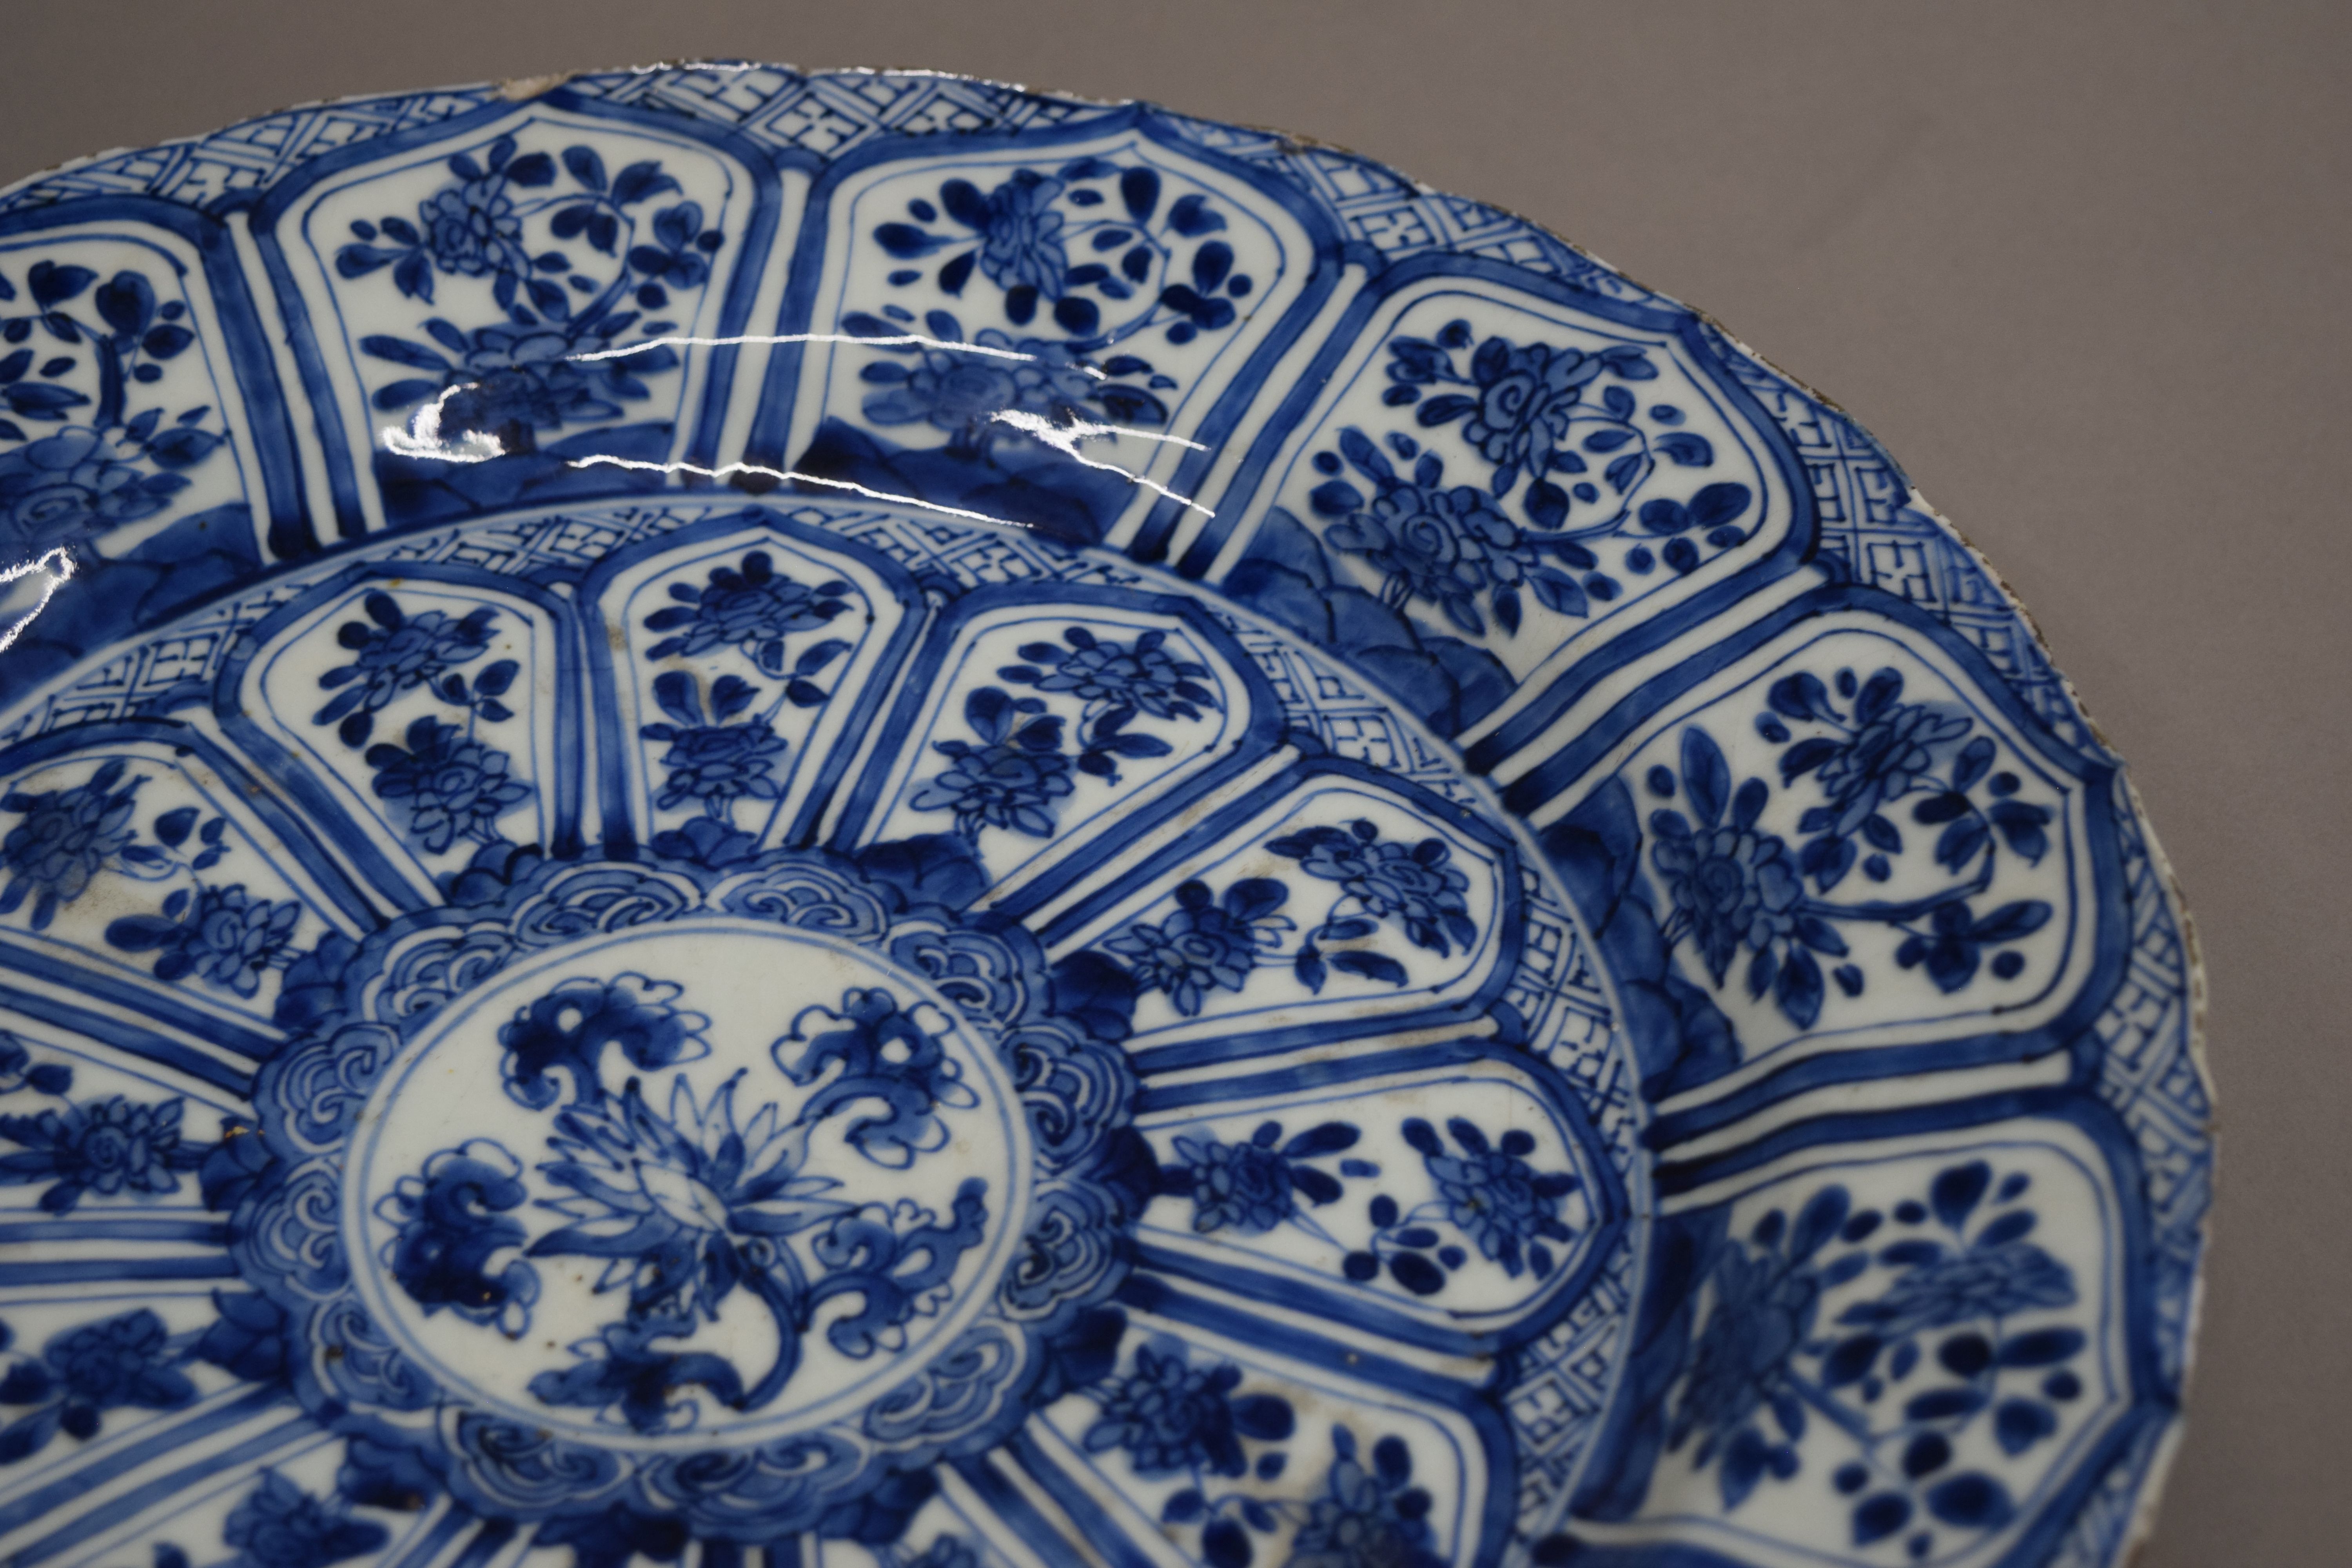 A 19th century Chinese blue and white porcelain plate. 35 cm diameter. - Image 4 of 7